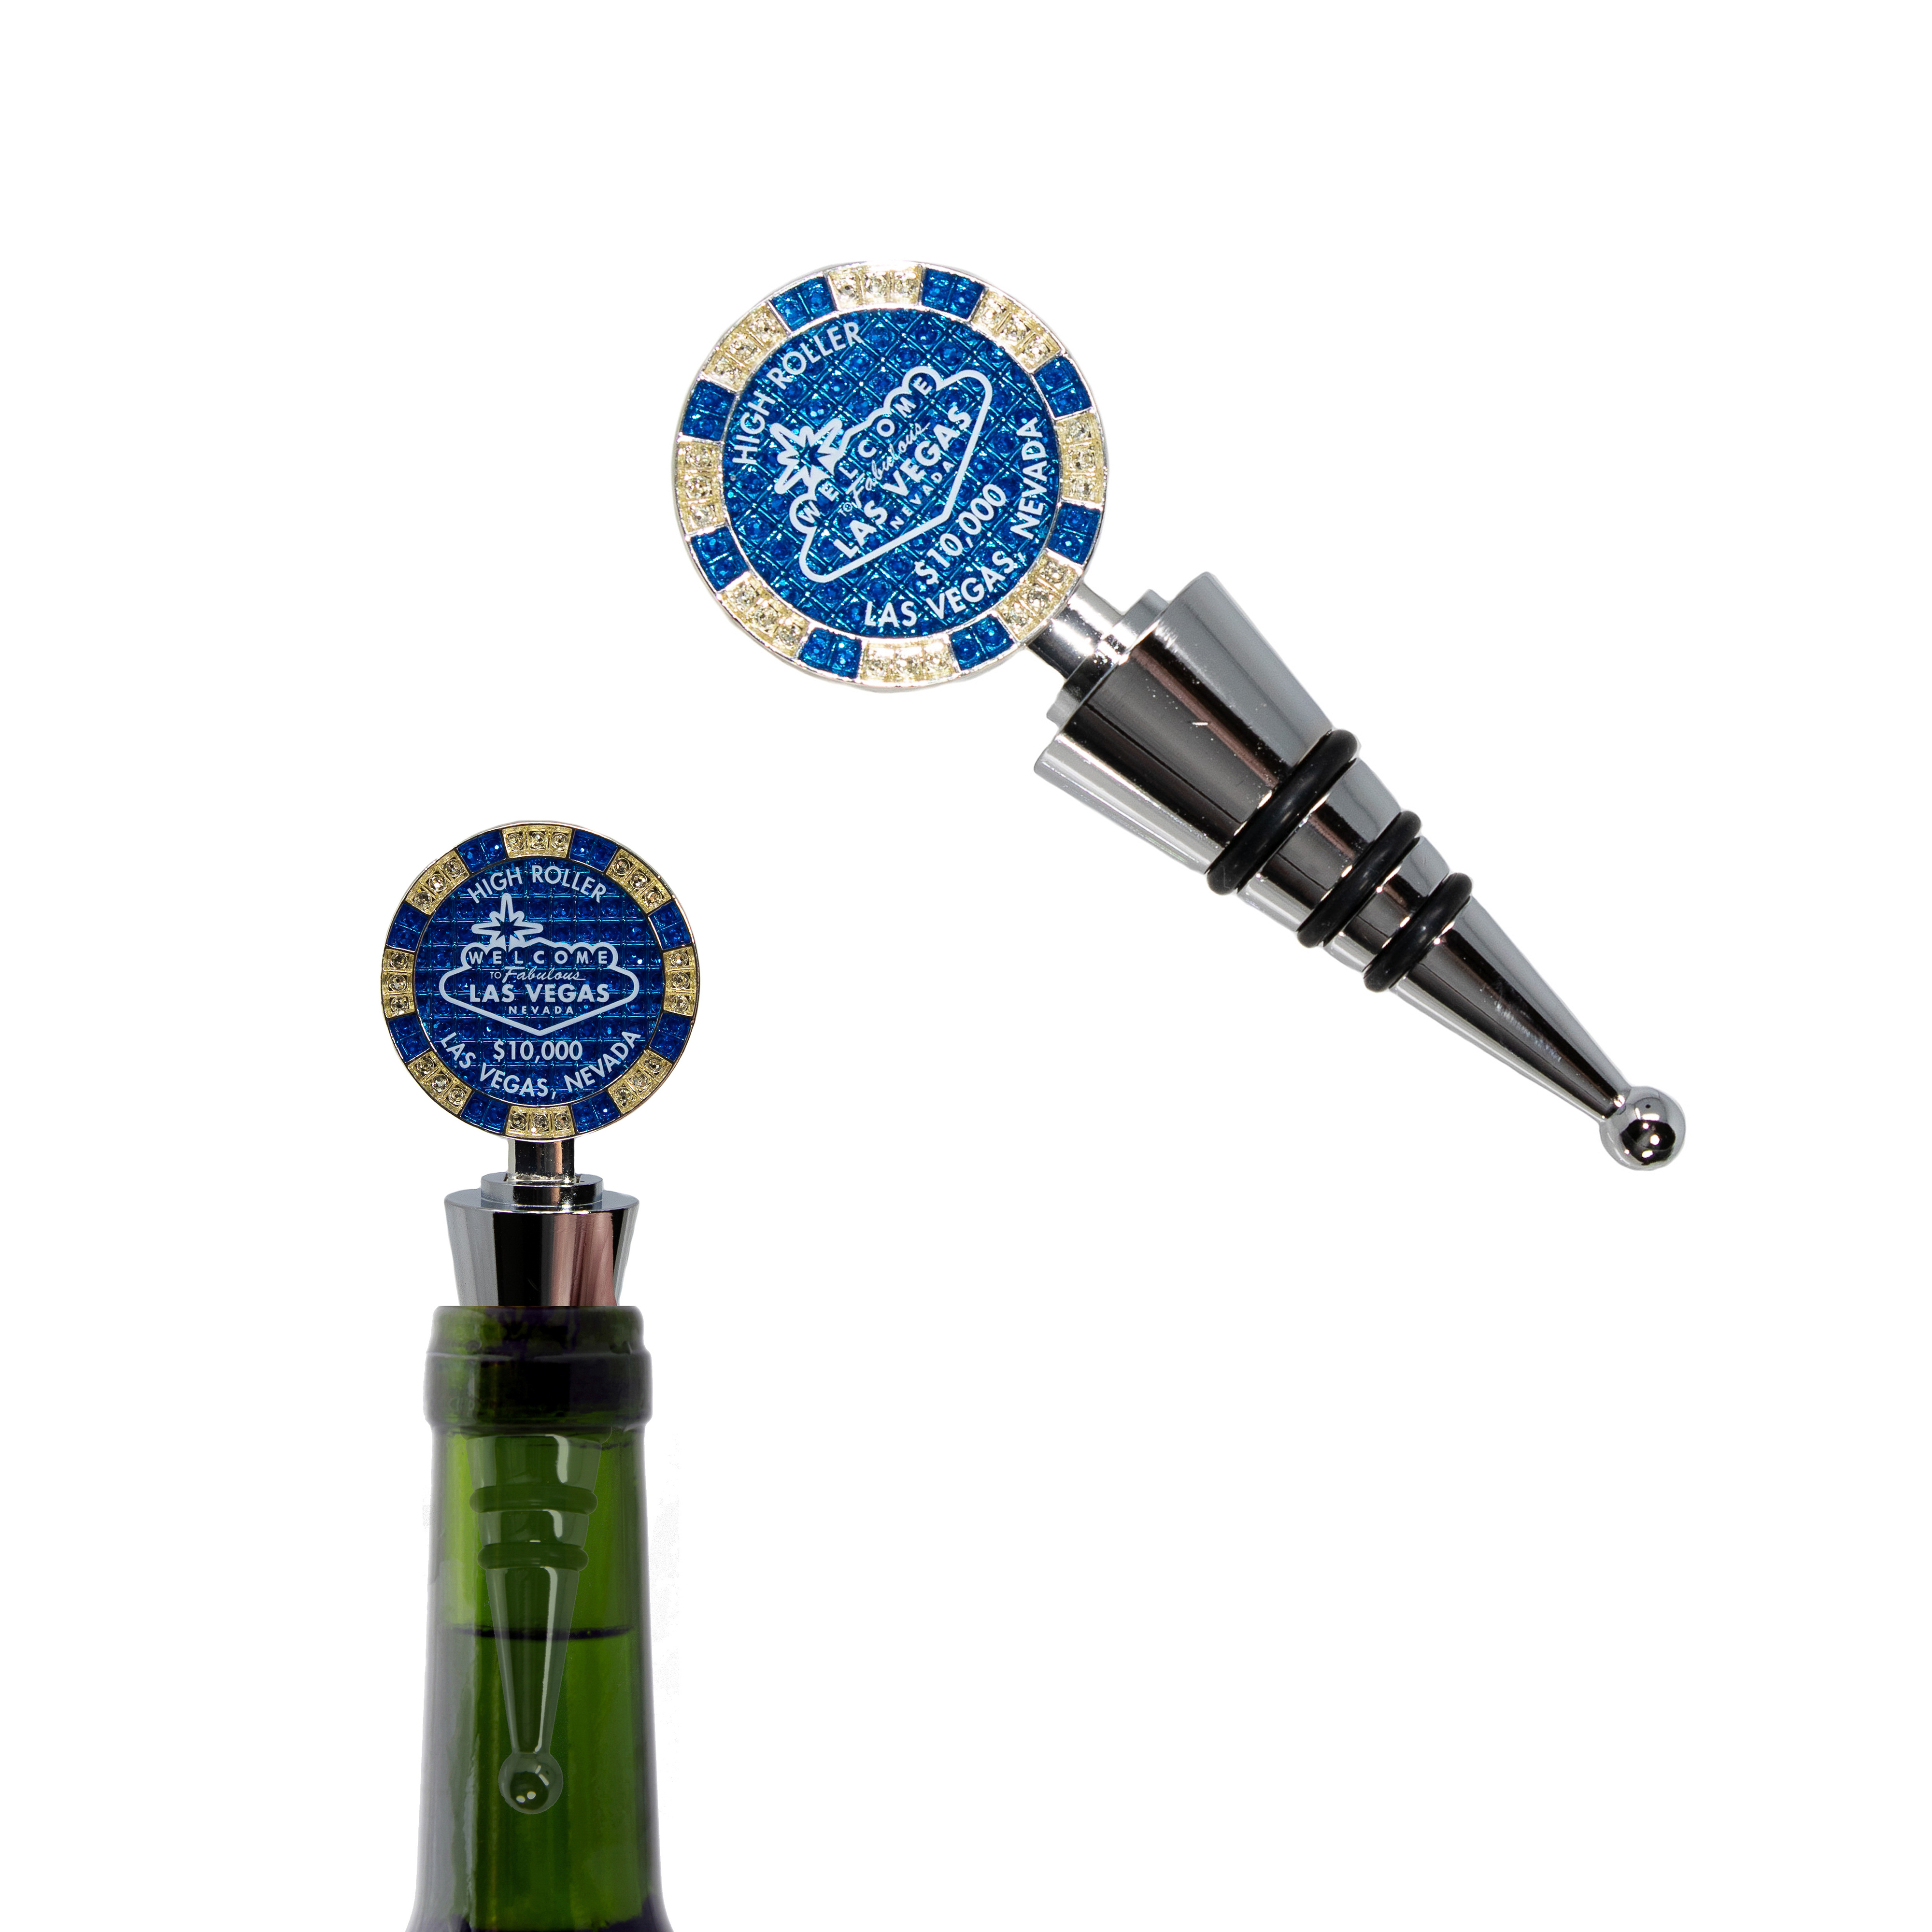 $10,000 Las Vegas Poker Chip Wine Stopper - Welcome to Las Vegas Sign Poker Chip Wine Stopper with Rubber Seal (Silver and Blue) - image 1 of 5